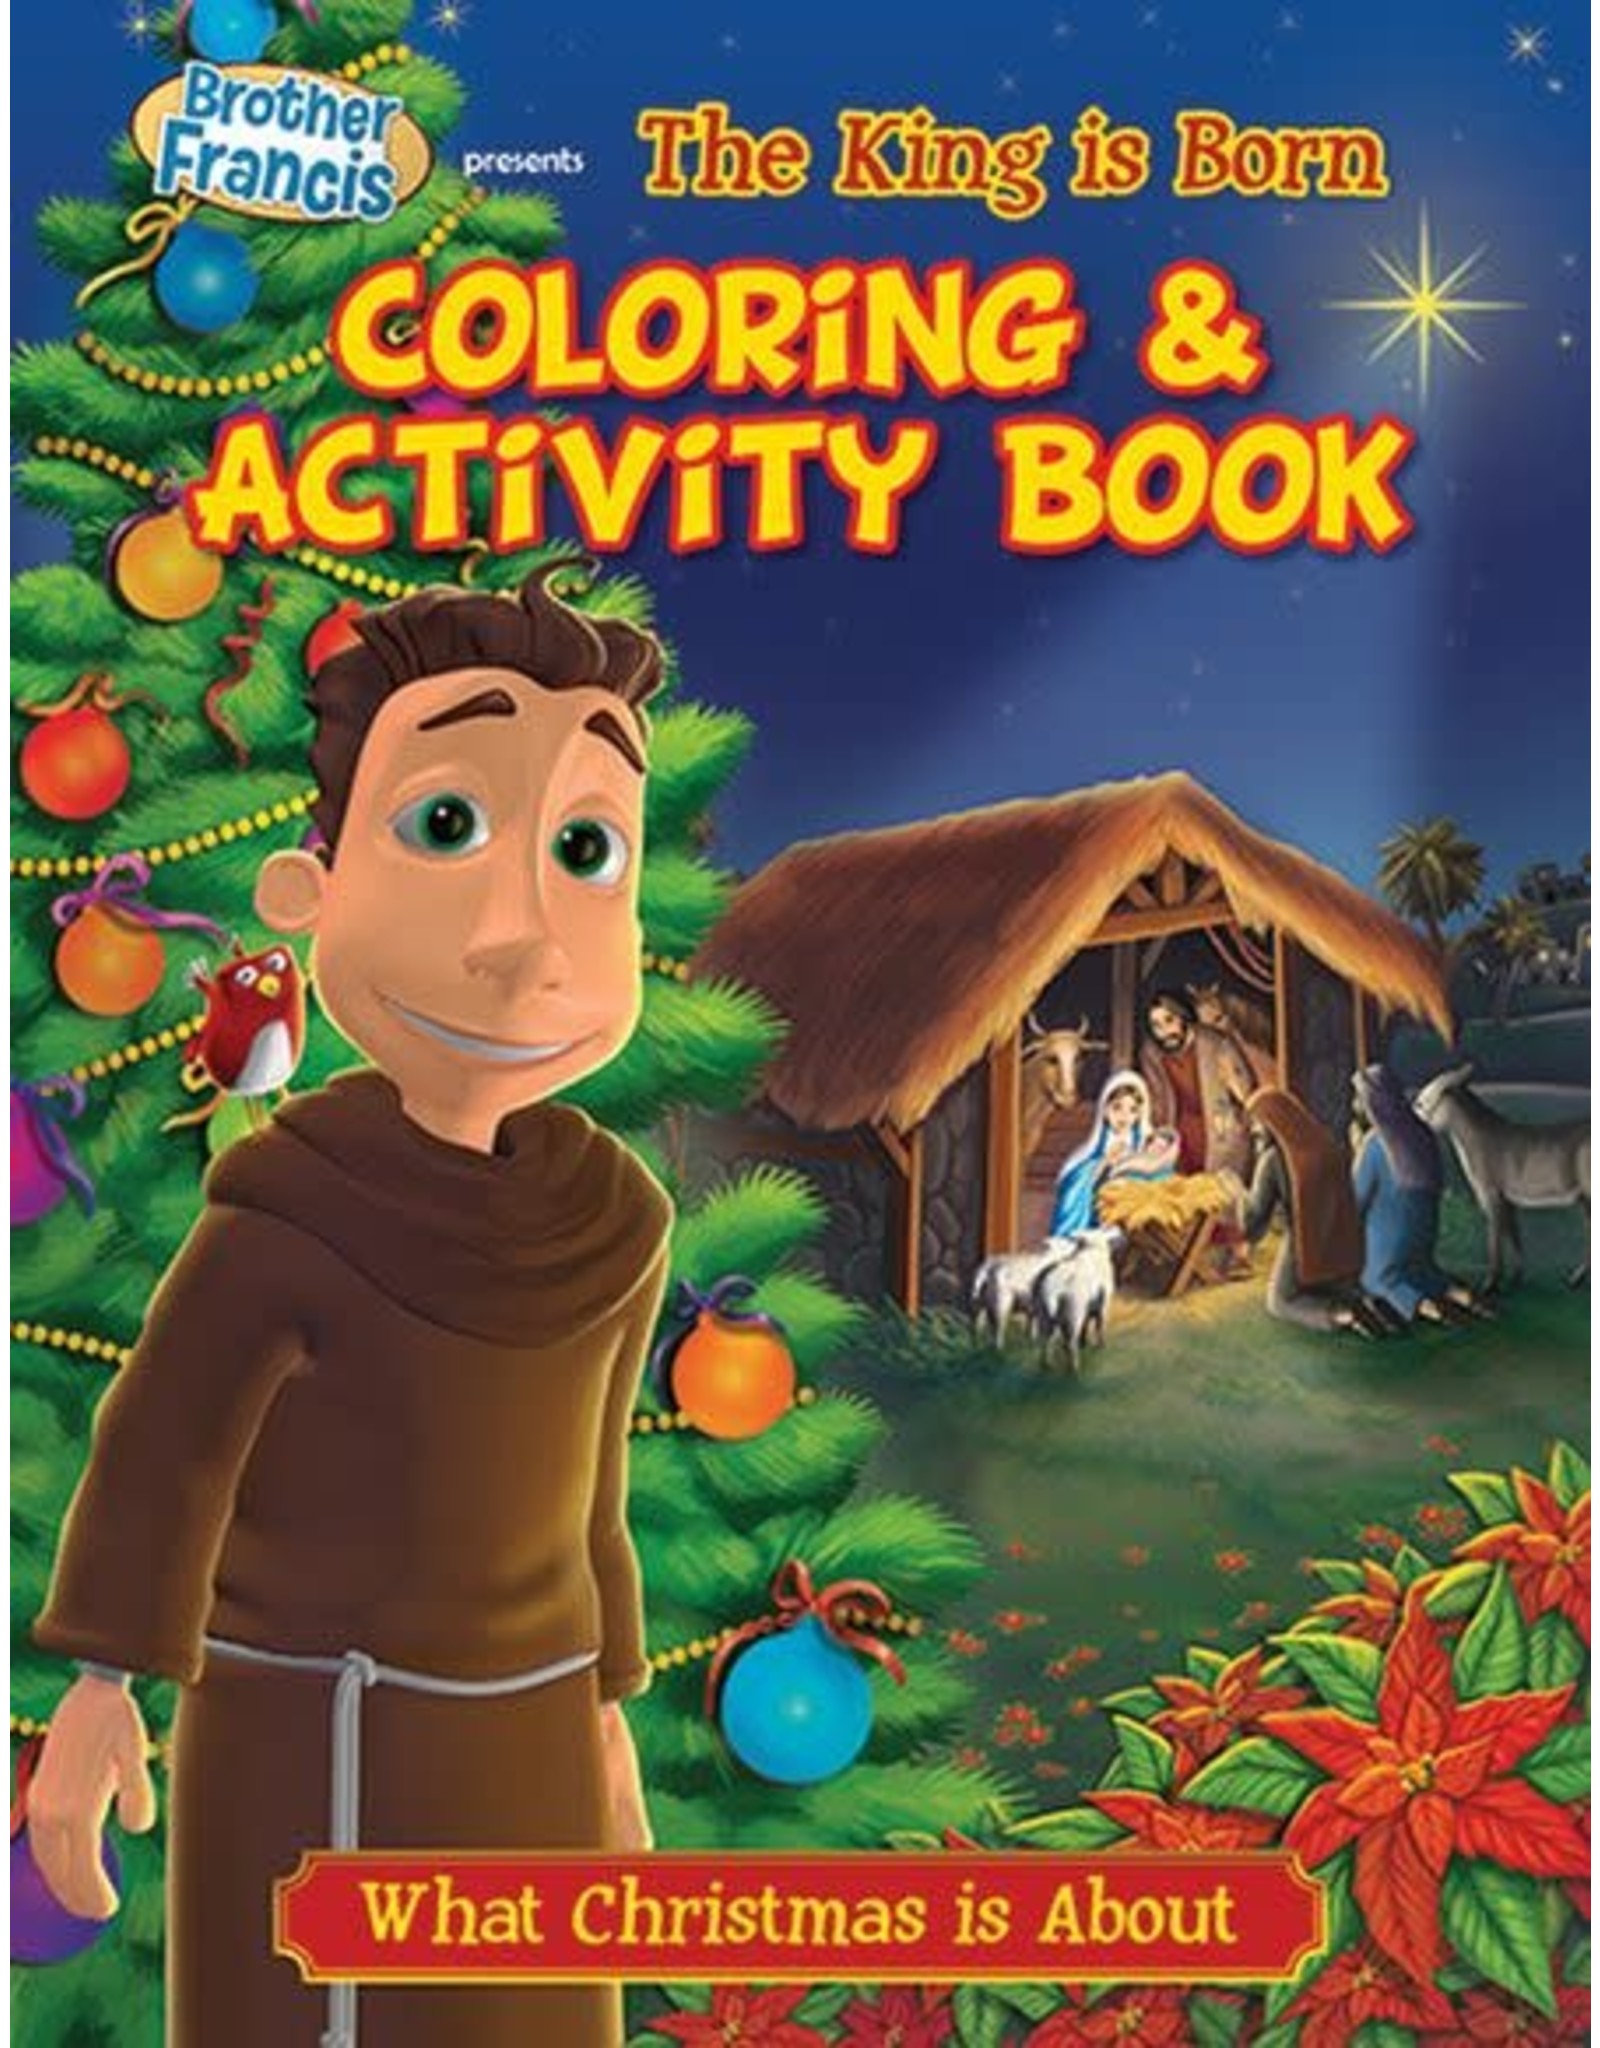 Brother Francis: The King Is Born Coloring & Activity Book